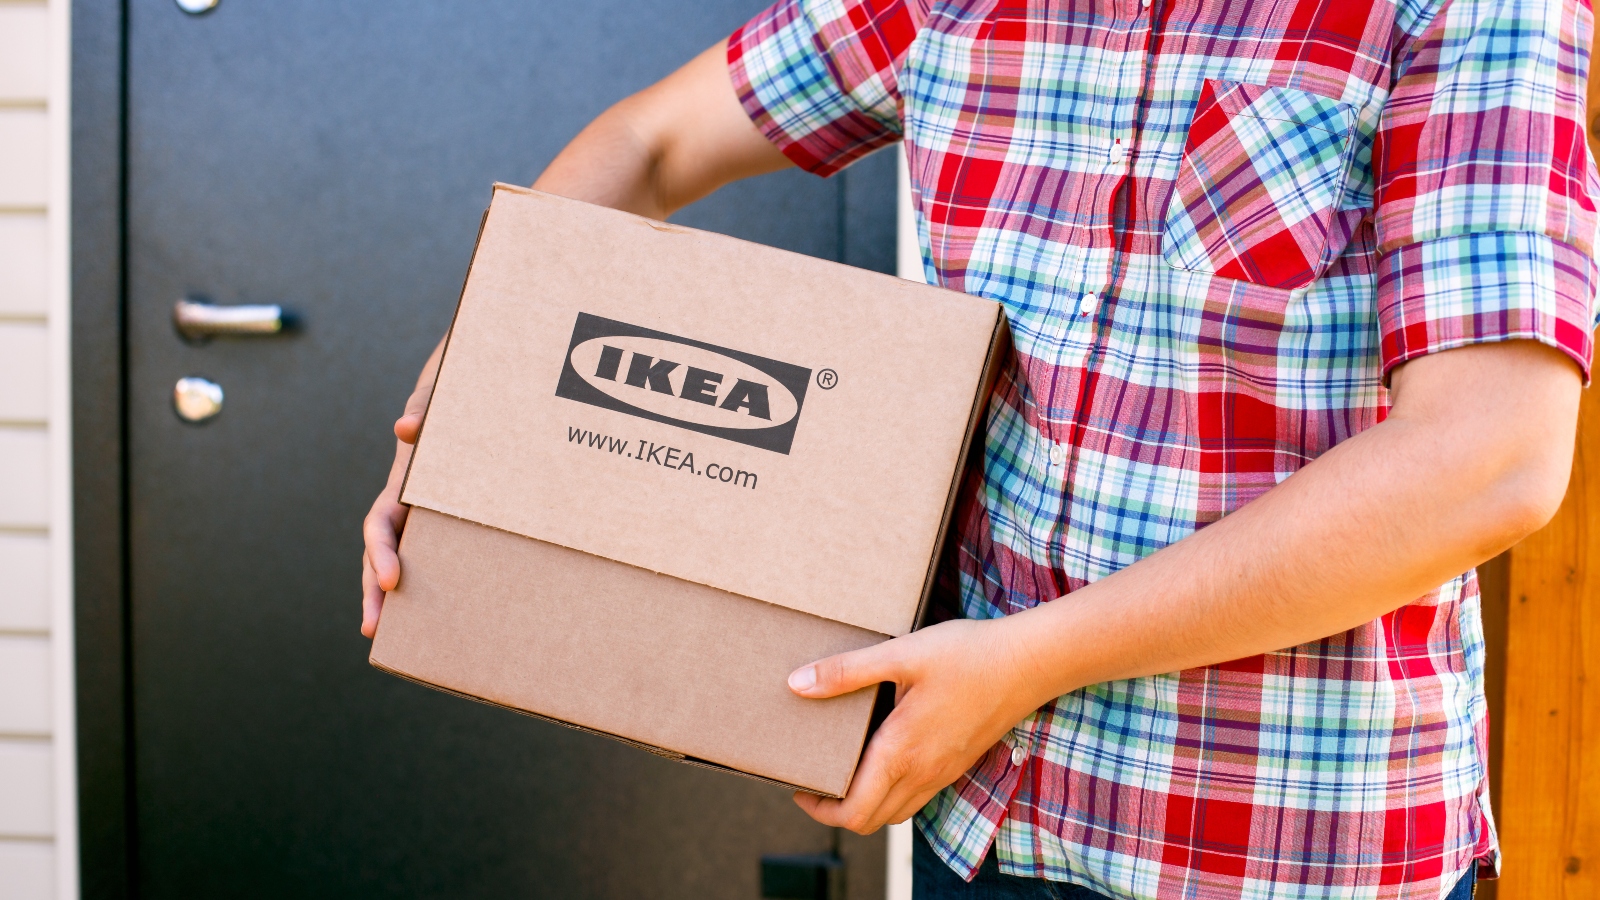 IKEA announces it will phase out plastic packaging by 2028